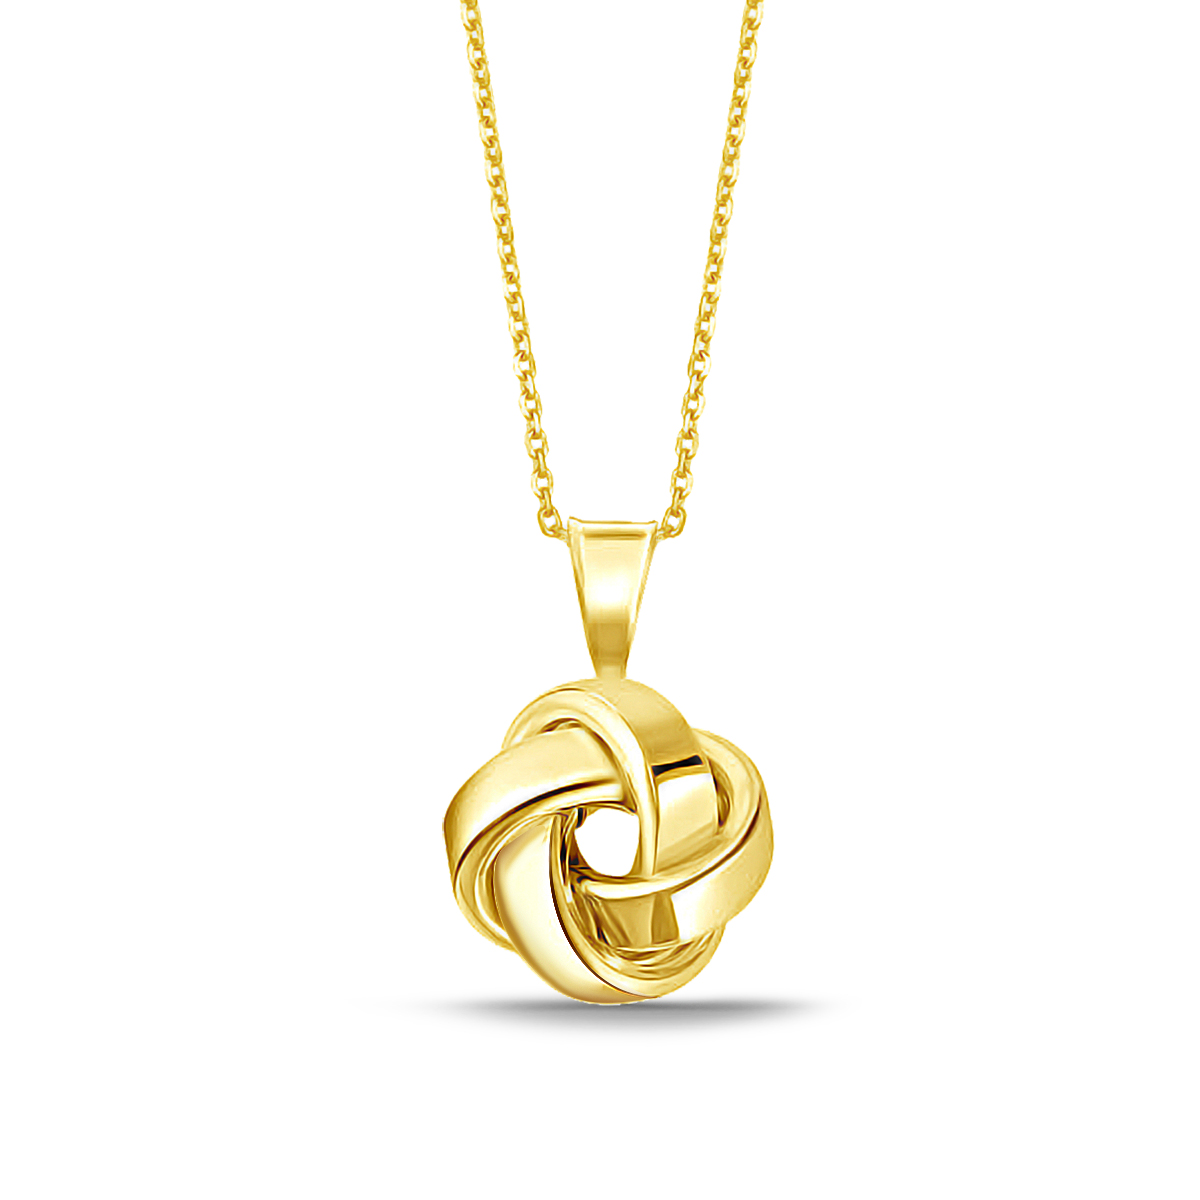 Classic Love Knot Necklace in 14K Yellow Gold